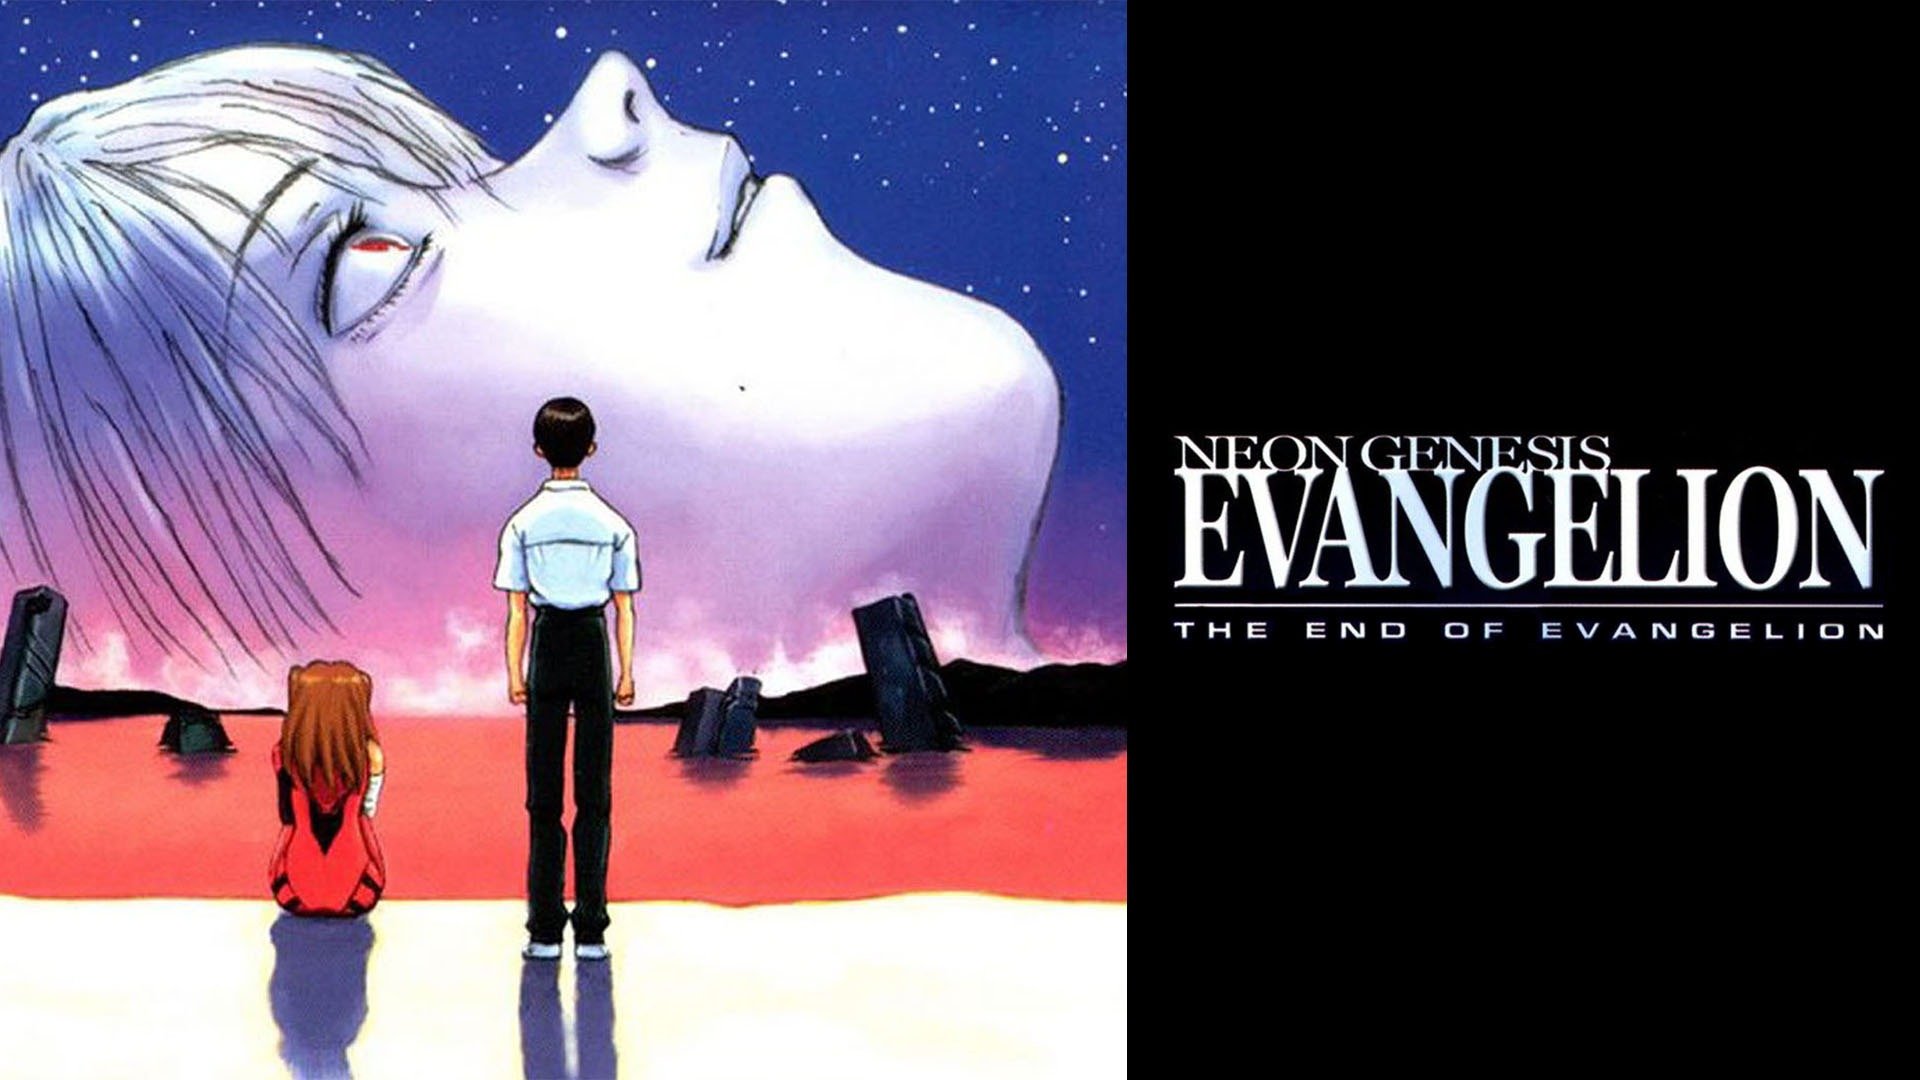 46-facts-about-the-movie-neon-genesis-evangelion-the-end-of-evangelion